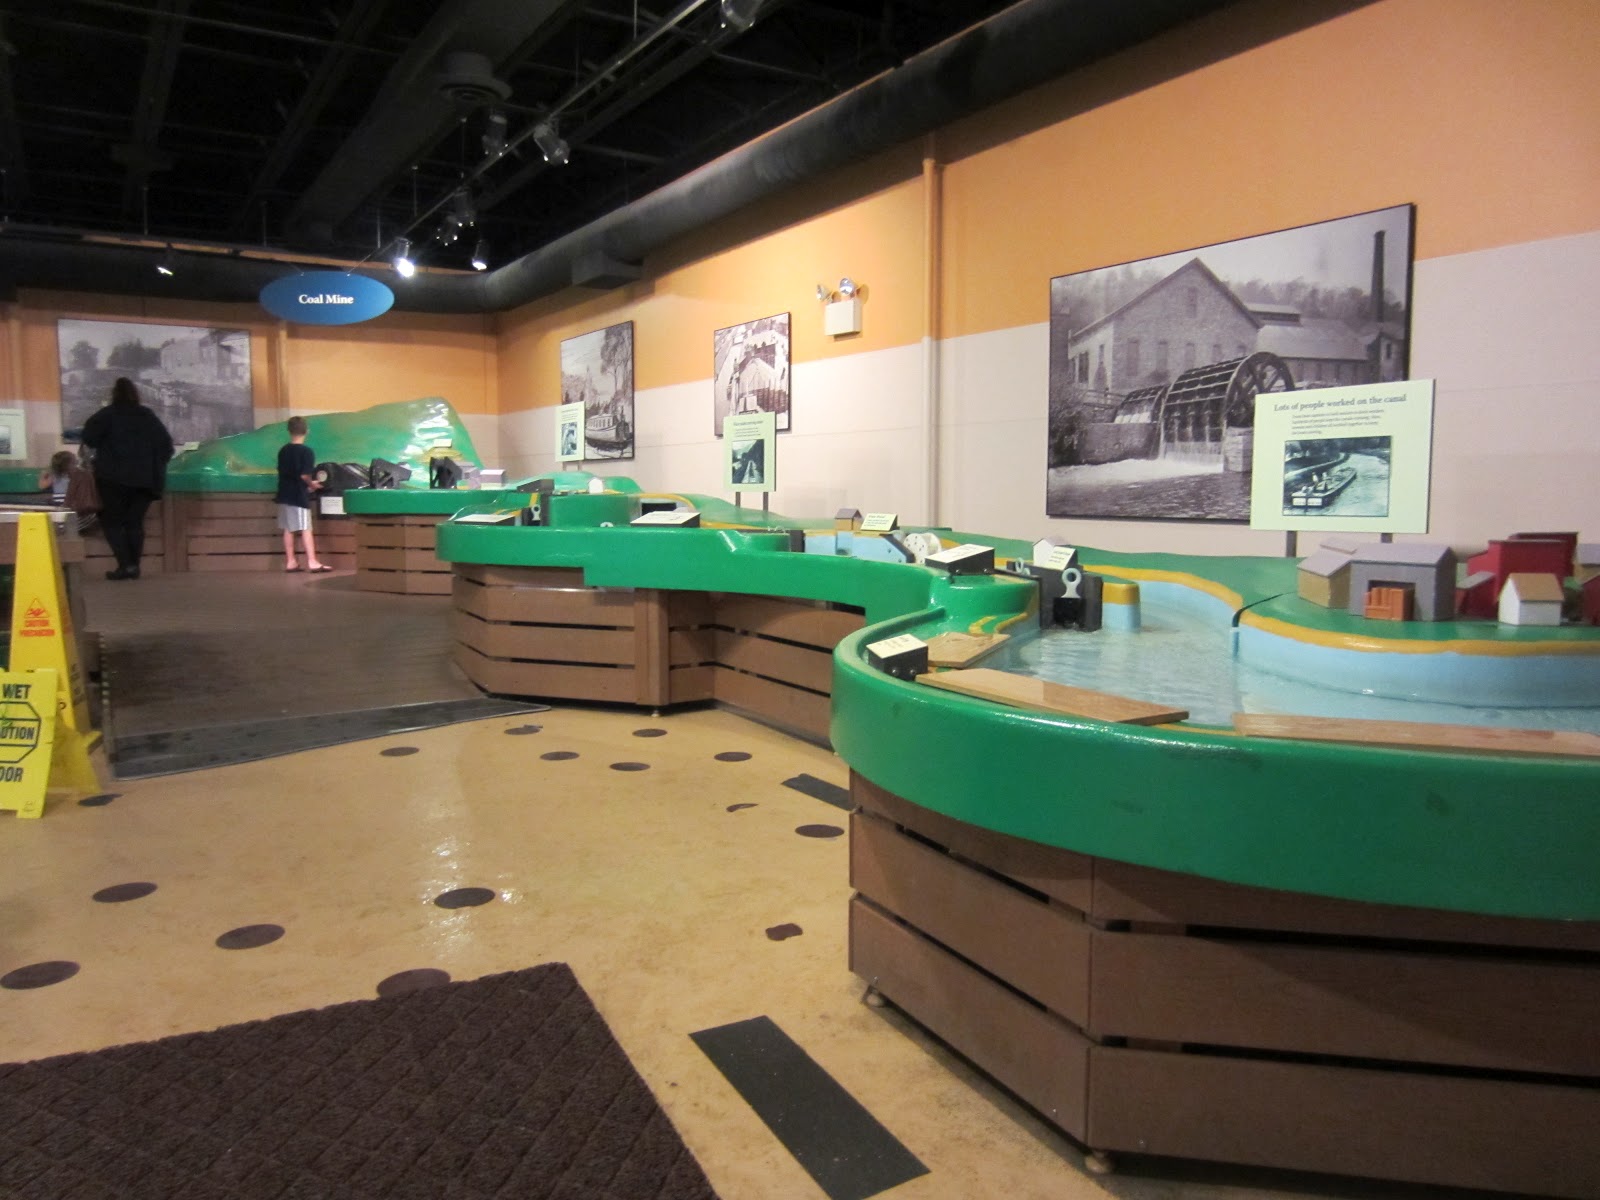 Waterworks Exhibit at the Crayola Experience